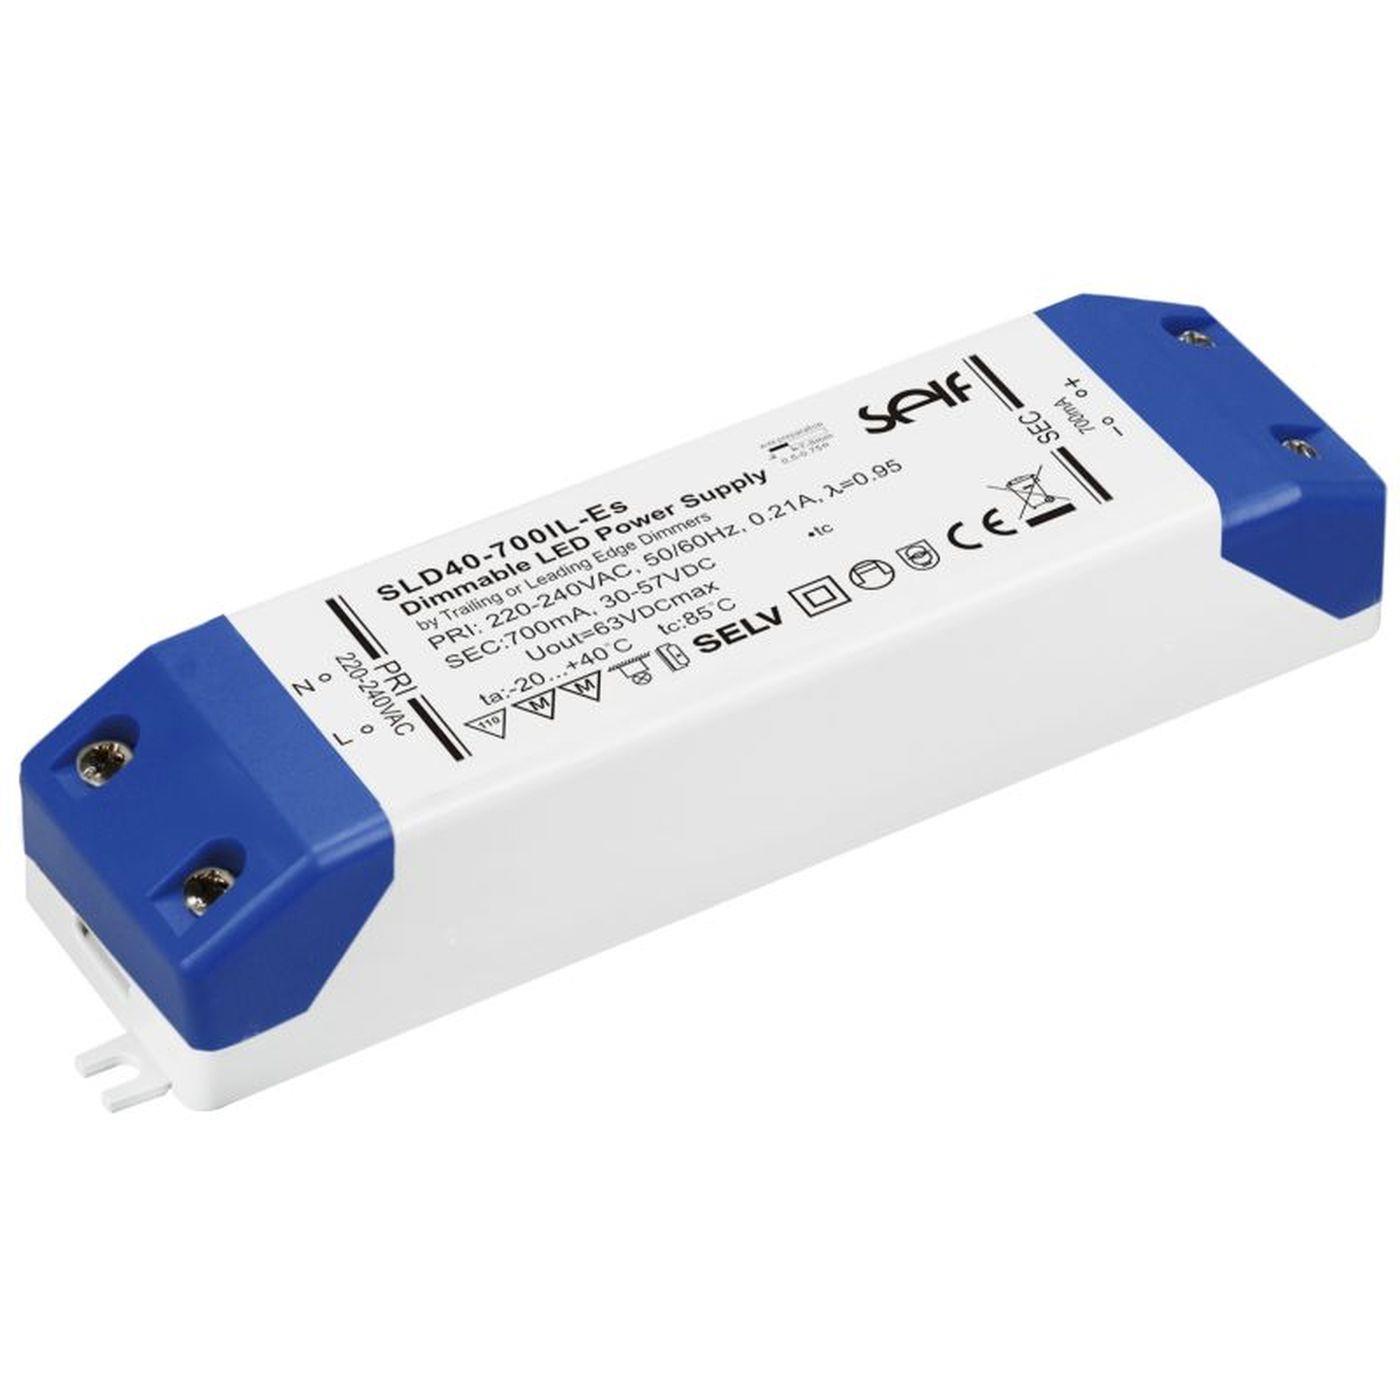 SLD40-1050IL-ES 40W 1050mA 19...38VDC Constant current LED power supply Driver Transformer Triac Dimmable